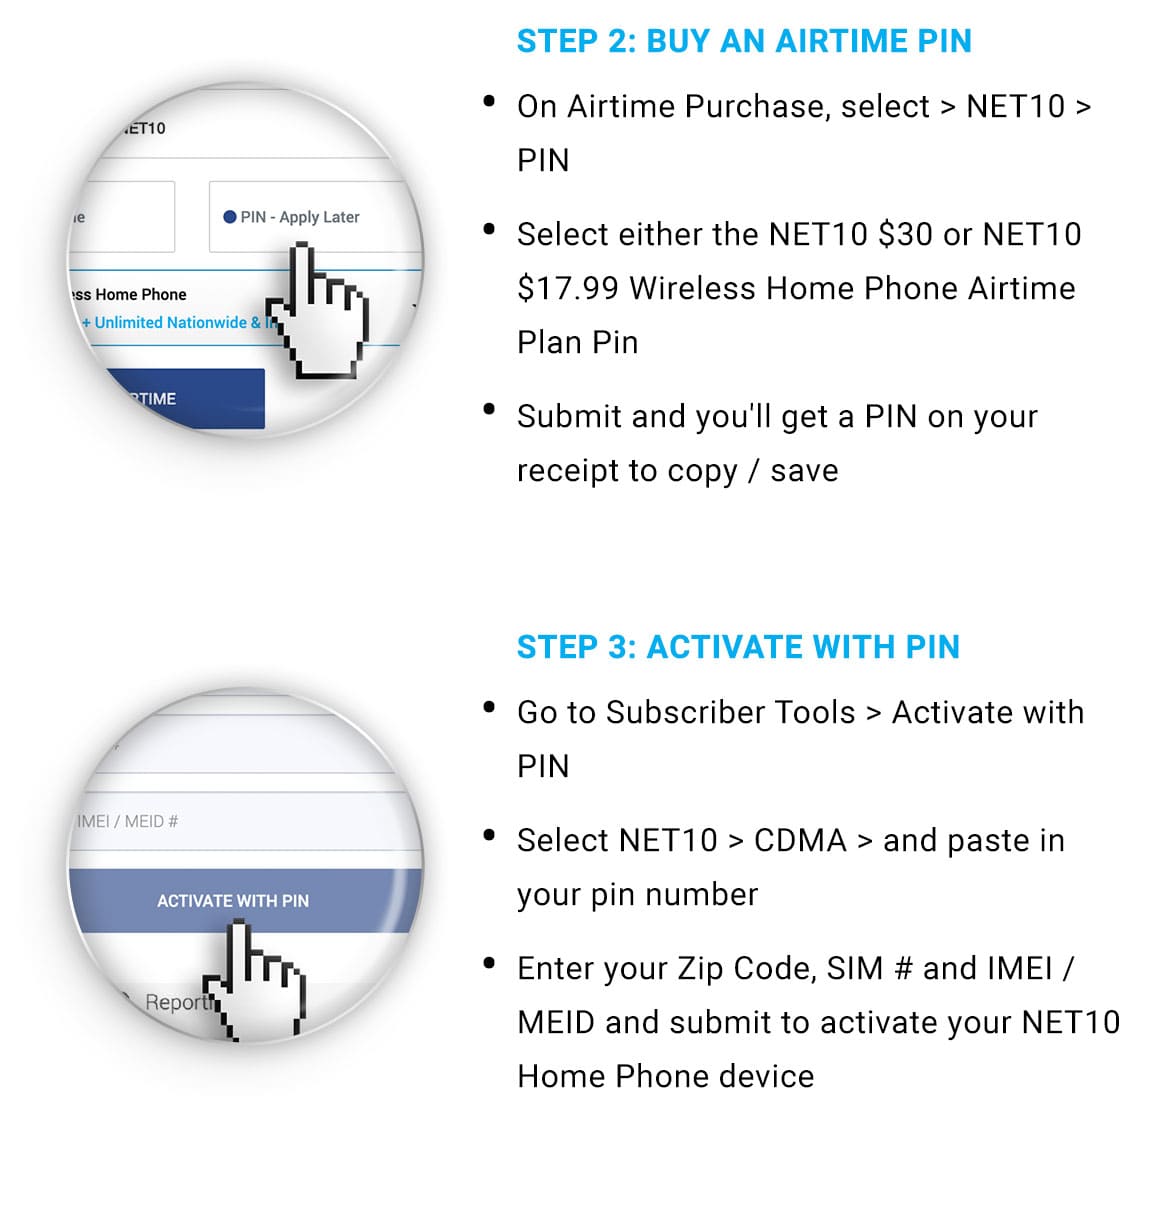 Step 2: Buy an Airtime Pin.  On airtime purchase, select NET10 PIN. Select either Home Phone plan Pin, then submit and you'll get a PIN on your receipt.  Step 3: Activate with PIN: Go to Subscriber Tools and Activate with PIN. Select Net10, then CDMA, and paste in your PIN number.  Enter zip code, SIM number and IMEI or MEID and submit toactivate your Net10 Home Phone device.